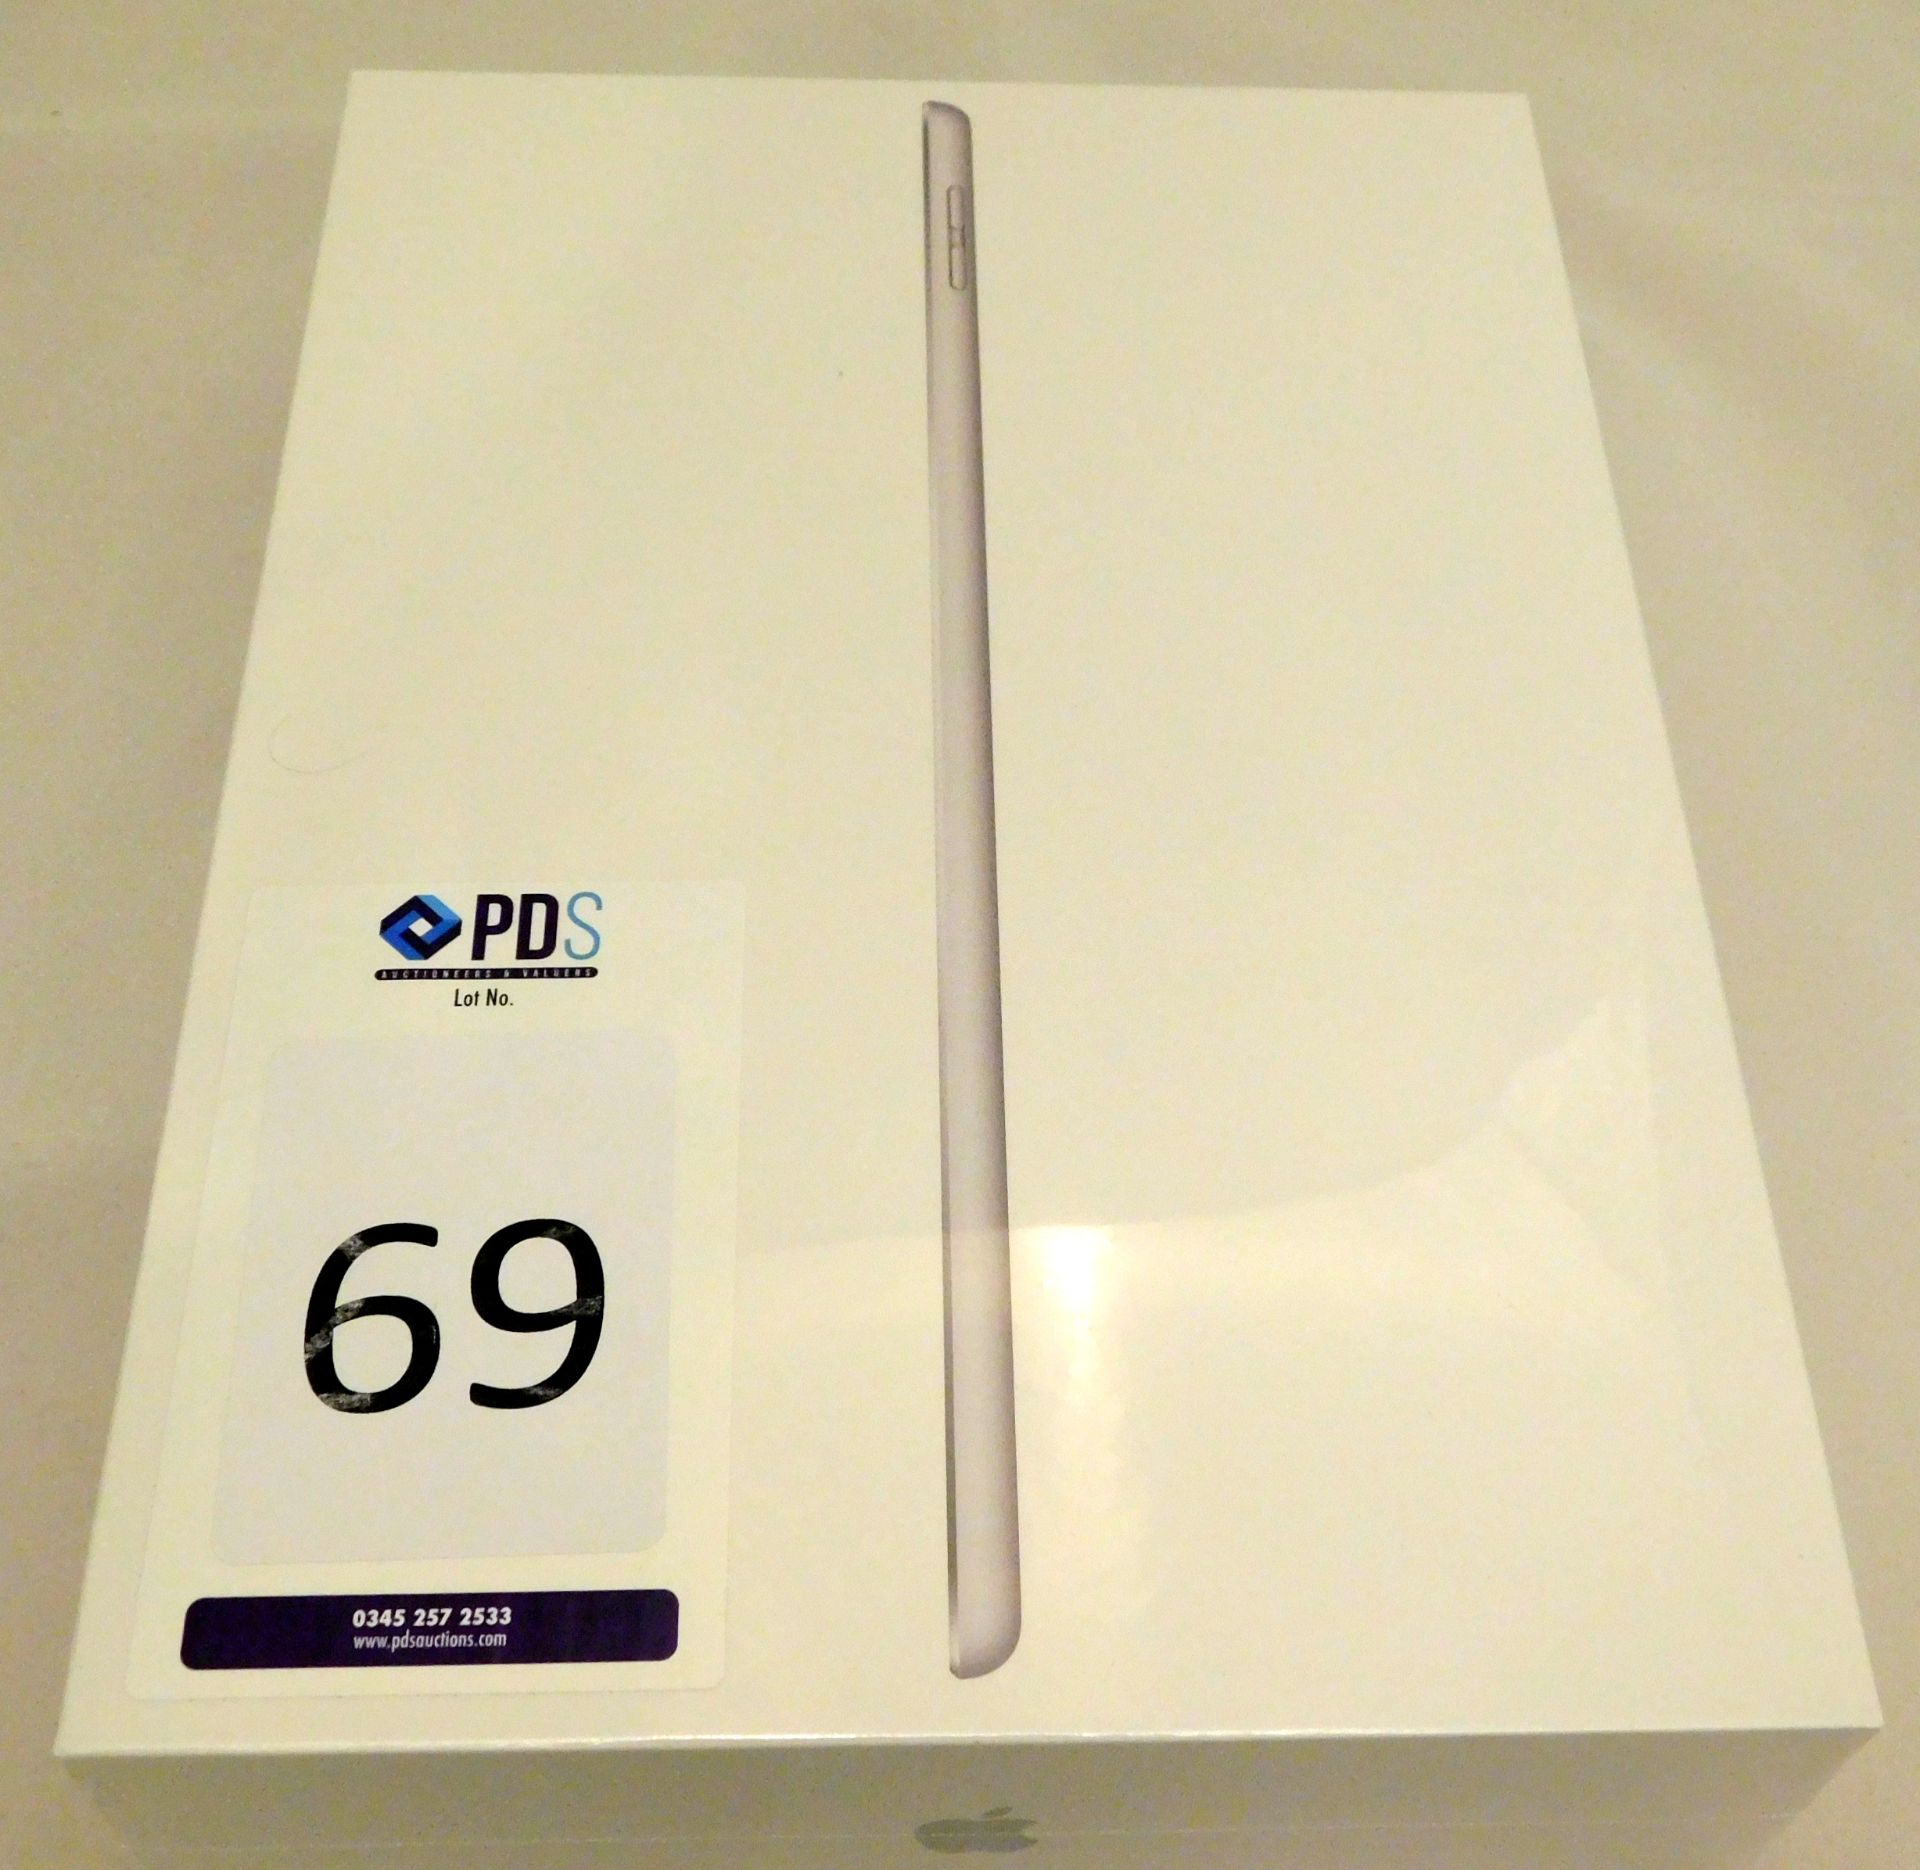 Apple A2197 iPad, 7th Gen, 32GB, Silver, Serial Number: DMPC80FWMF3N, (New in Sealed Box) (Located